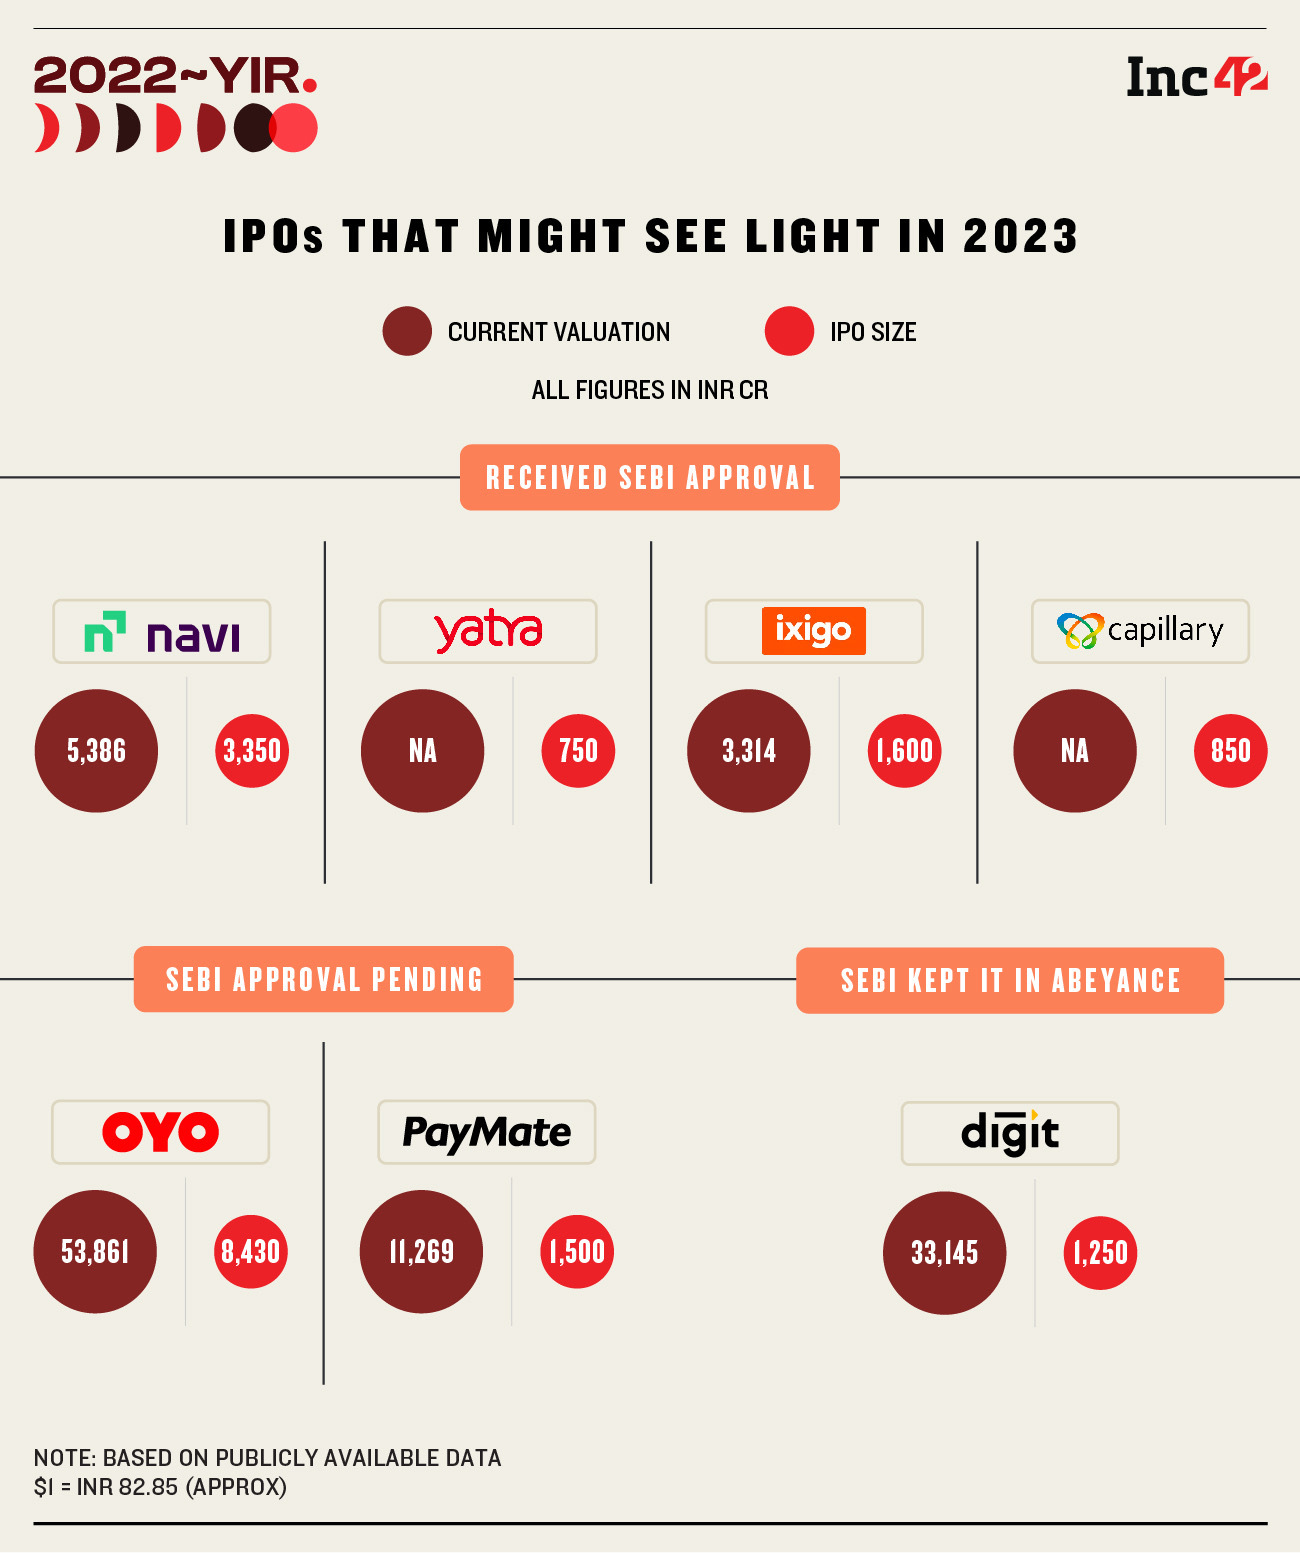 IPOs that might see light in 2023